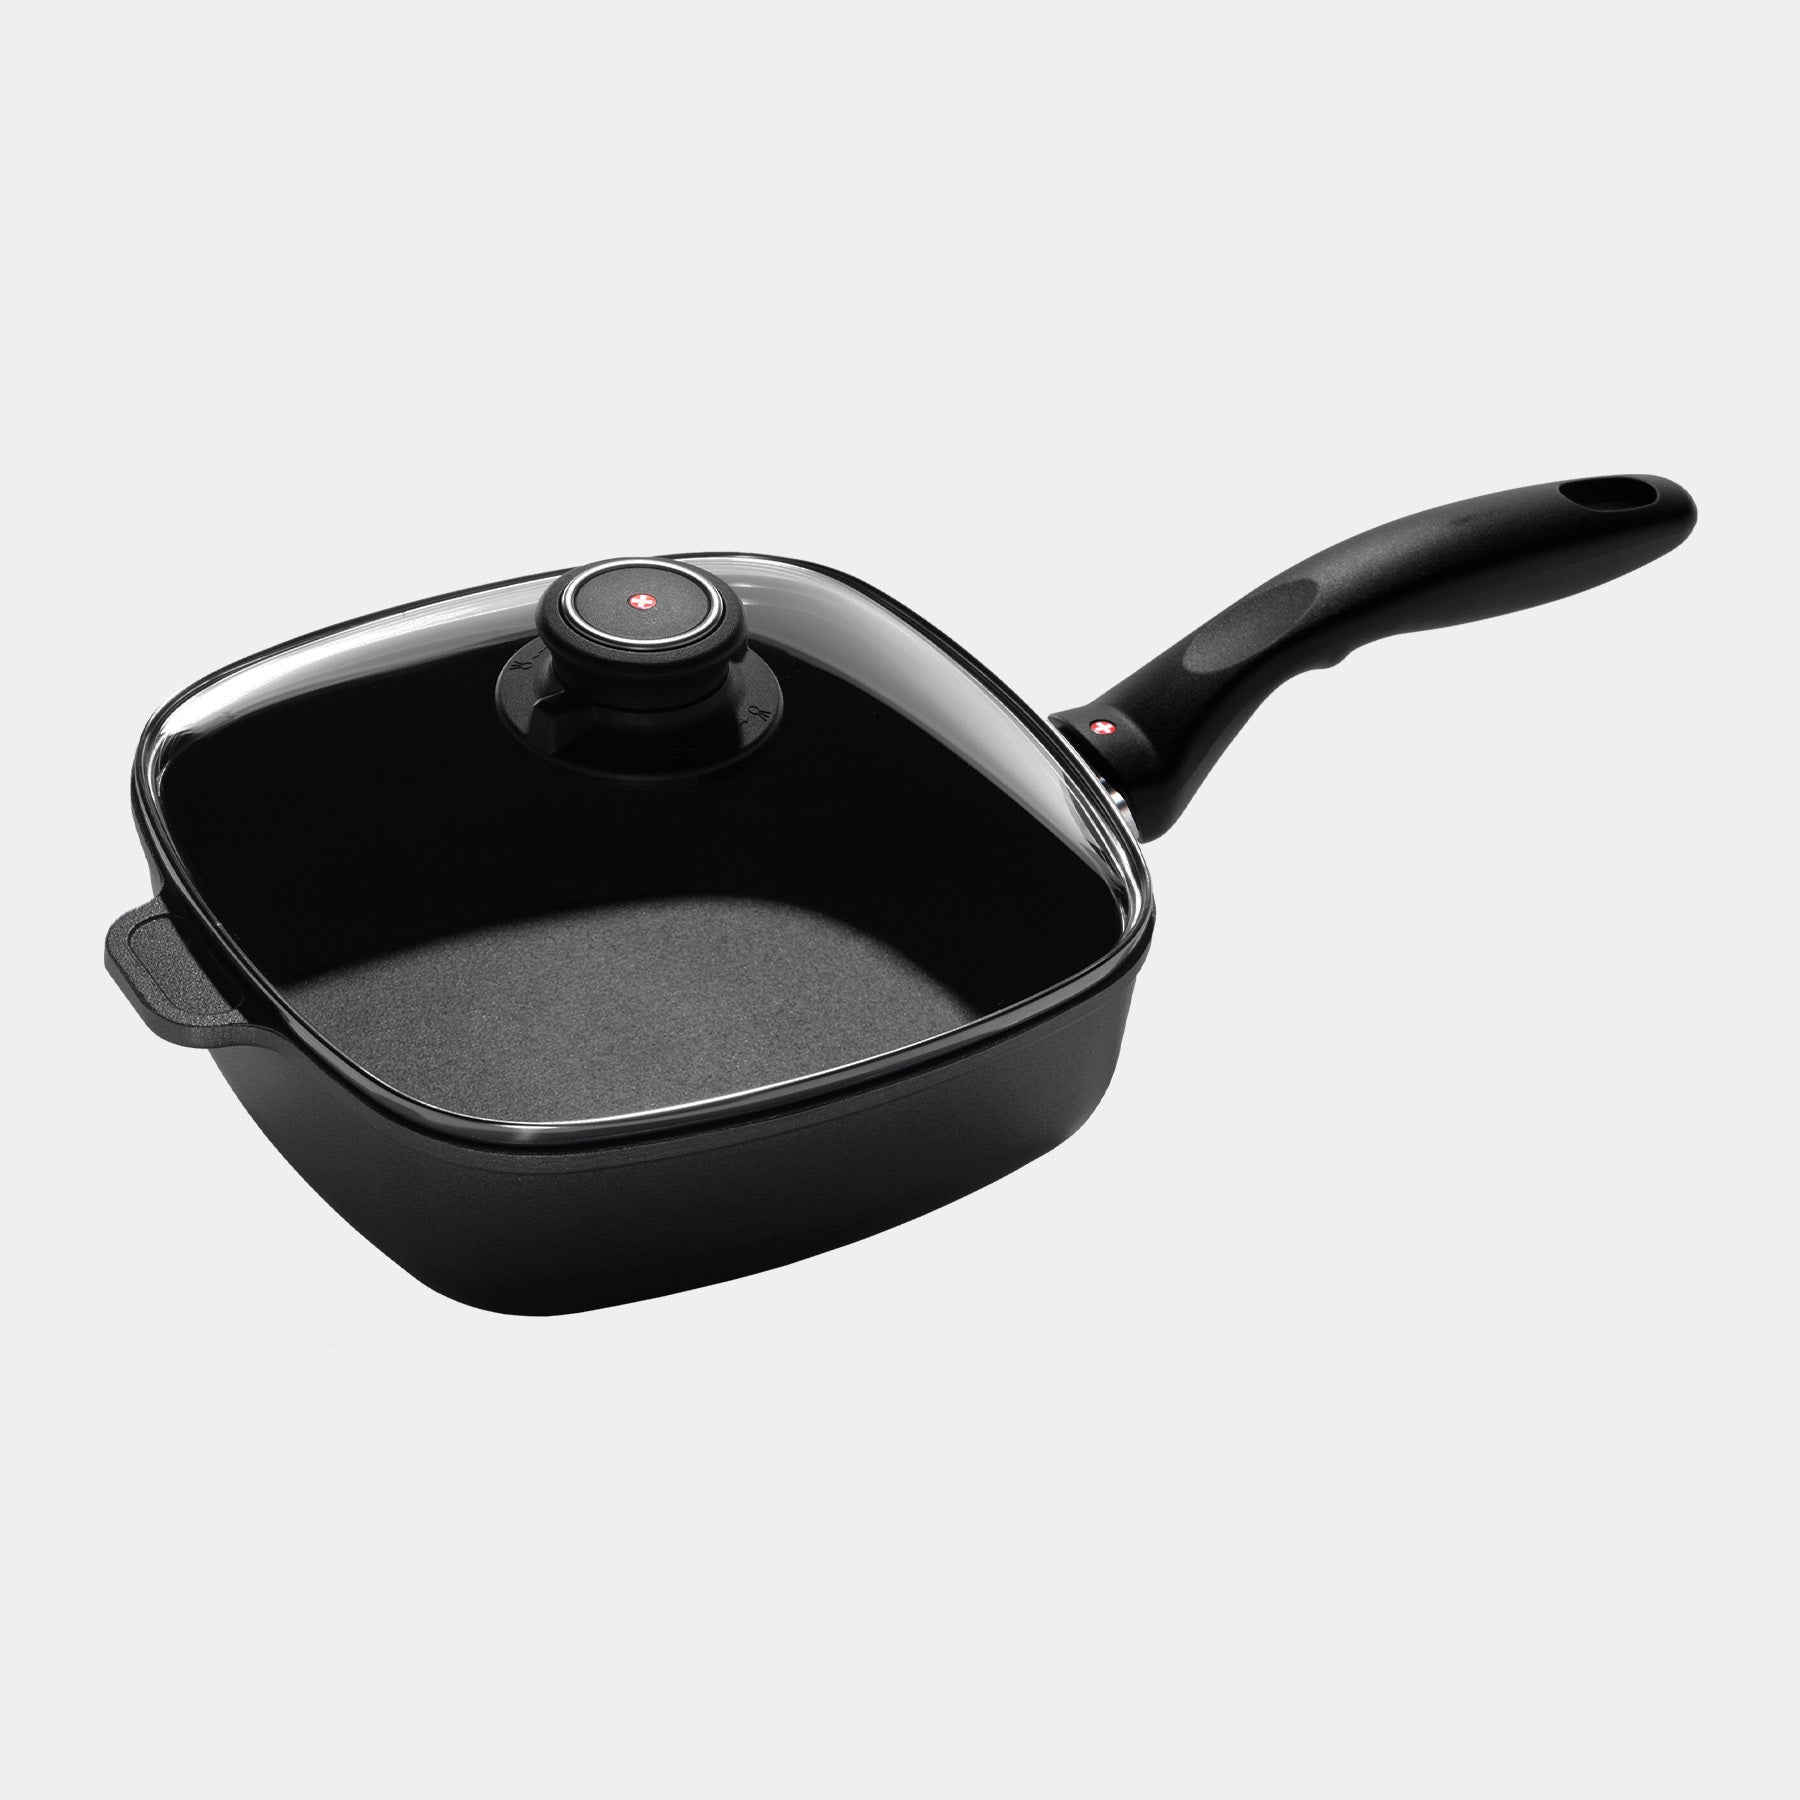 XD Nonstick 8" x 8" Square Saute Pan with Glass Lid - Induction Top View